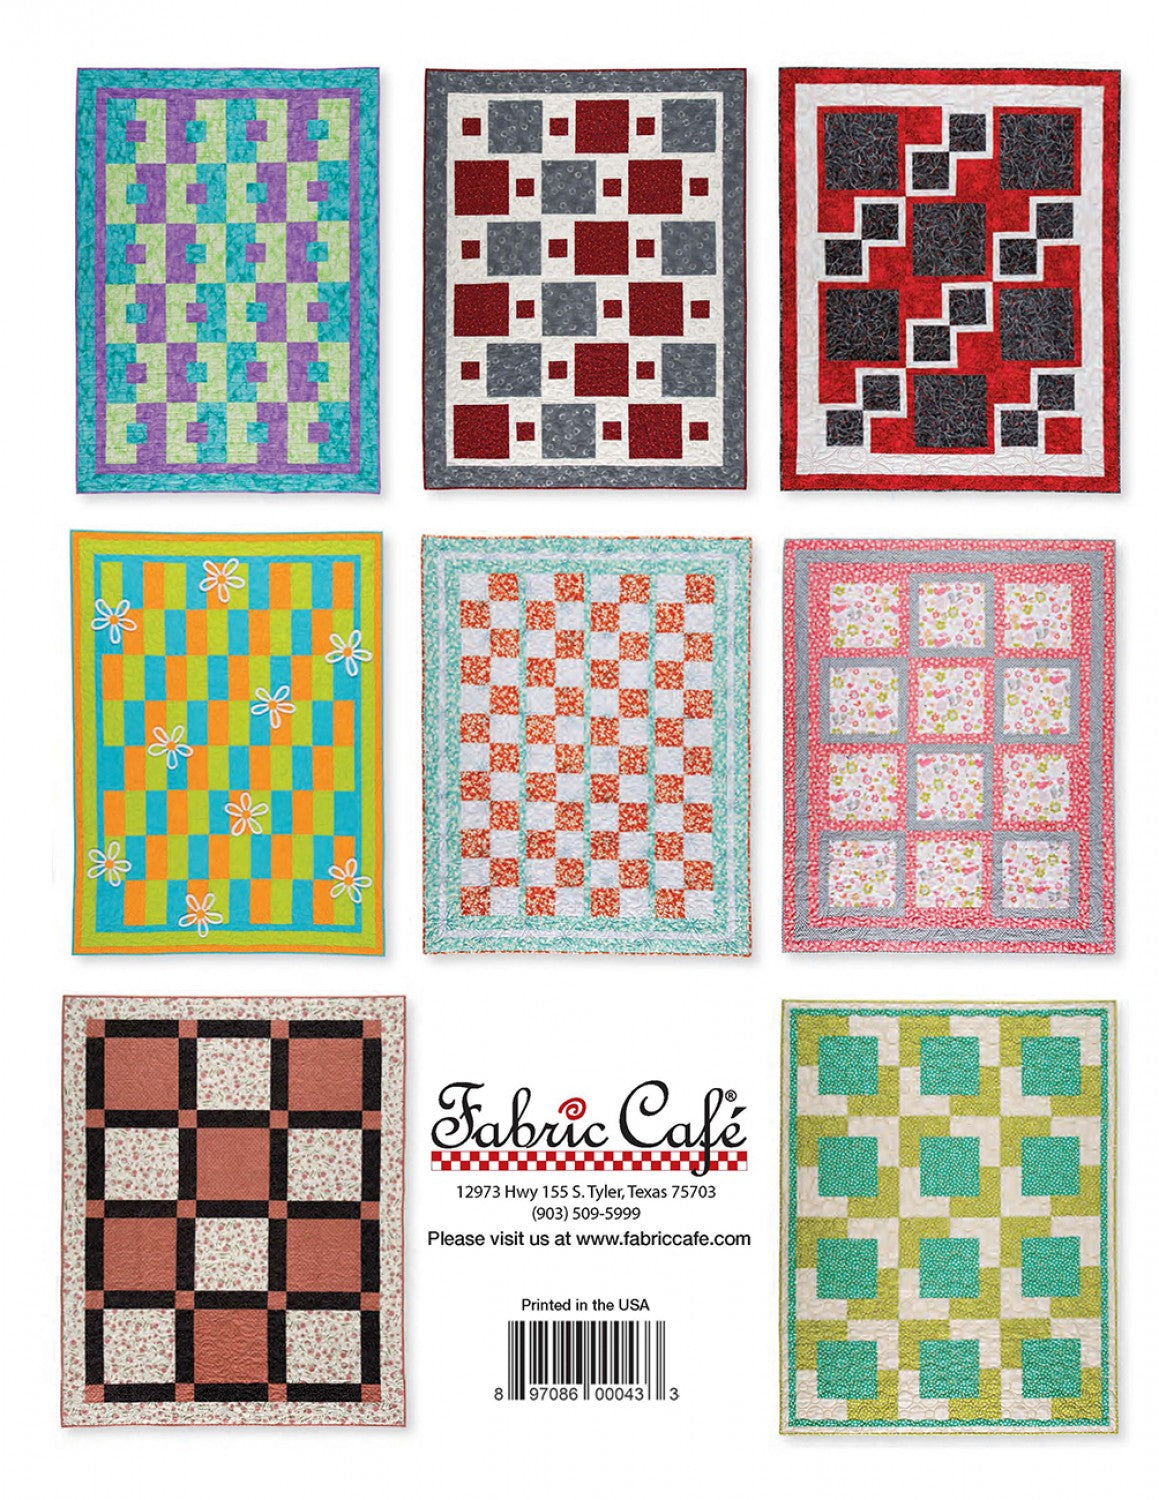 Pretty Darn Quick 3-Yard Quilts Booklet by Fabric Cafe/Donna Robertson  897086000549 - Quilt in a Day / Quilt Patterns